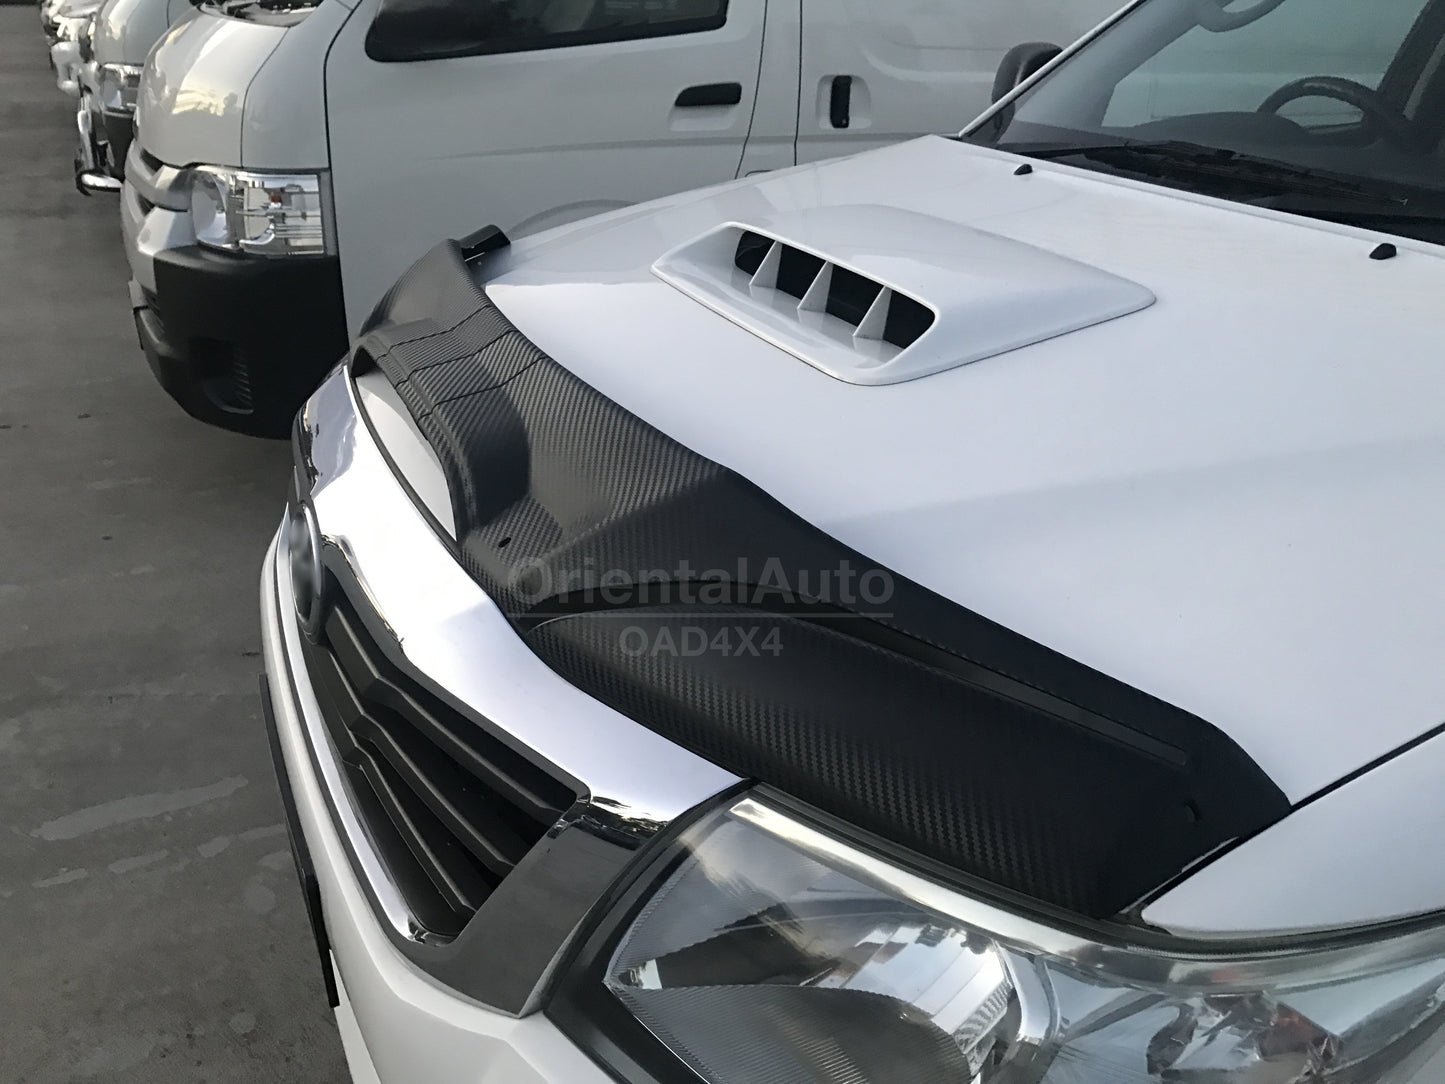 Injection Modeling Bonnet Protector & Luxury Weathershield for Toyota Hilux Extra Cab 2011-2015 4pcs Weather Shields Window Visor Hood Protector Bonnet Guard